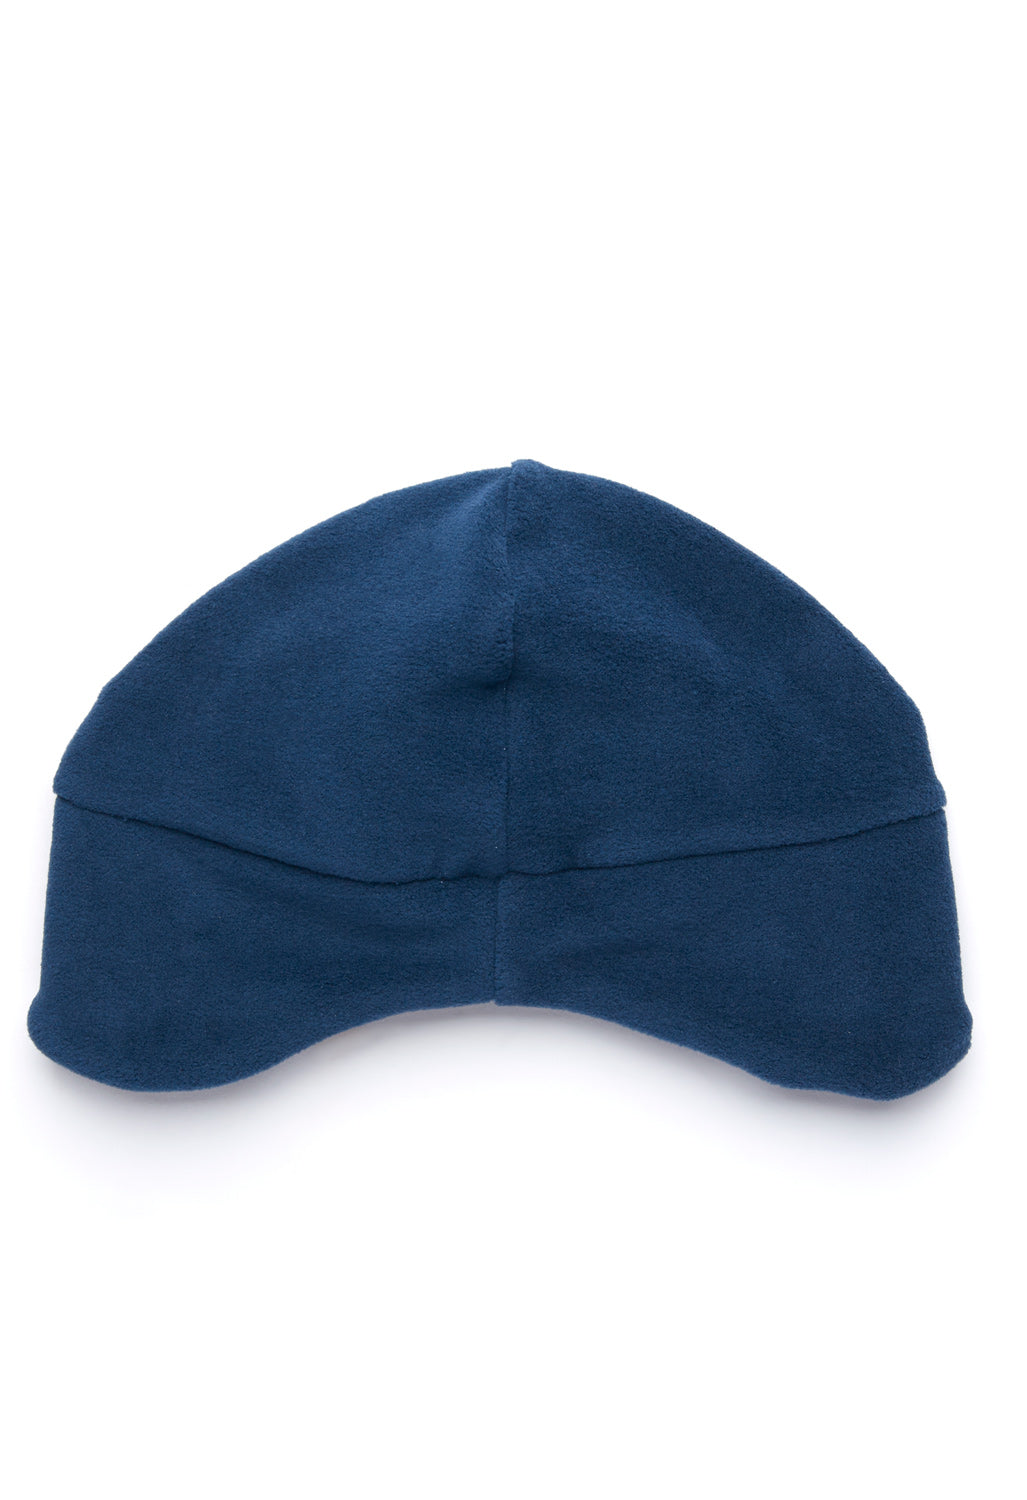 Montbell Chameece Cap With Ear Warmer - Navy